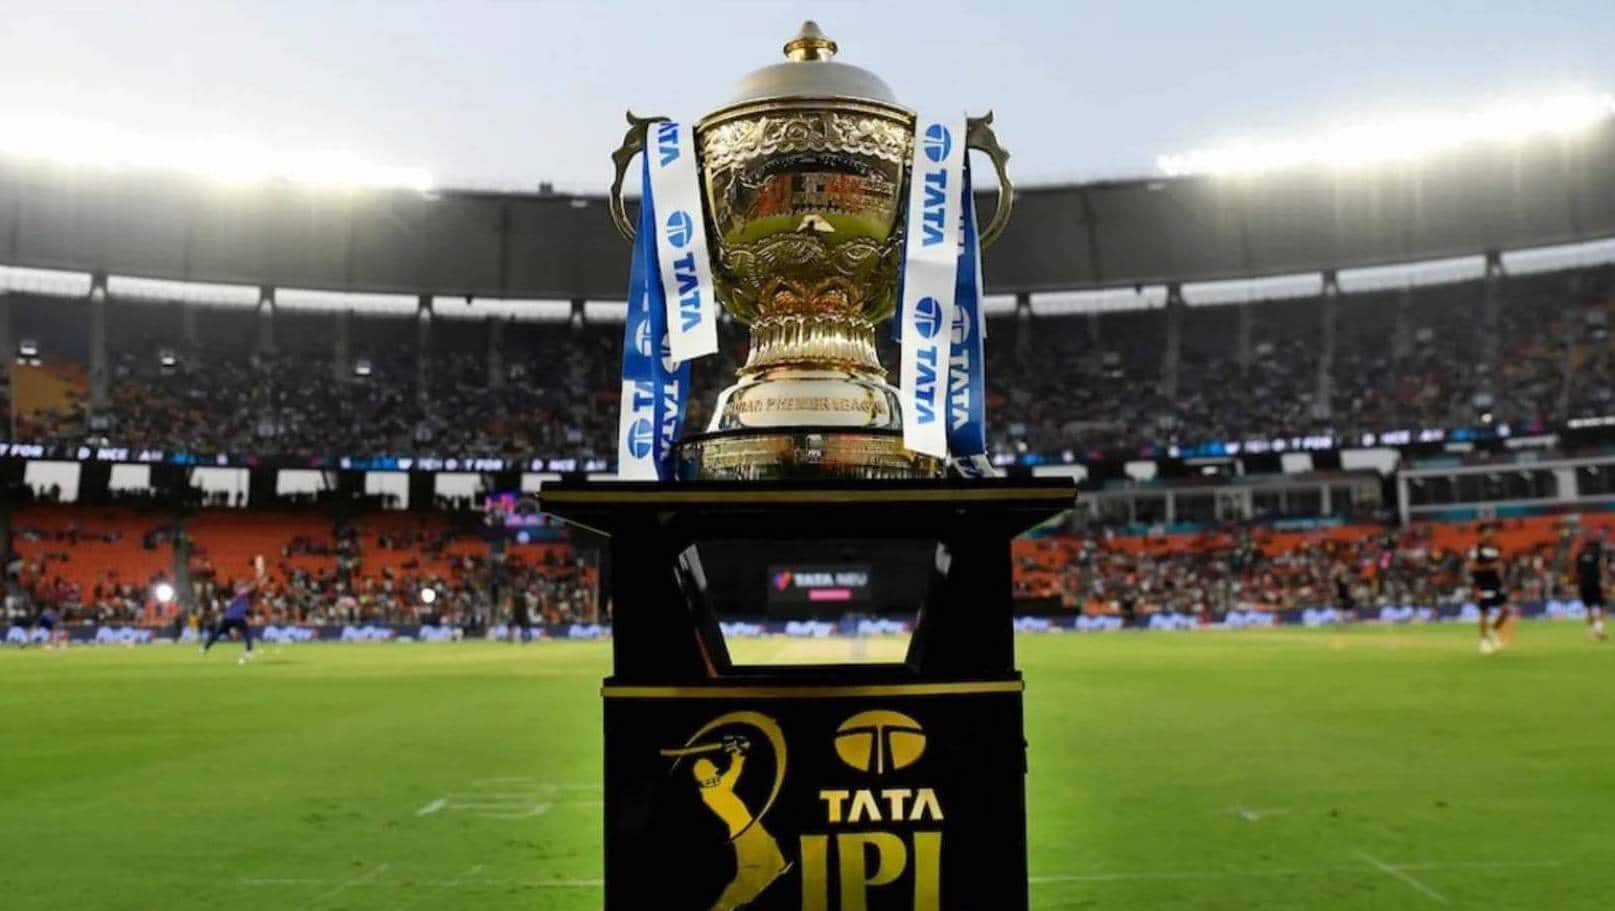 IPL Mini-Auction 2023: All you need to know Players, Slots, Purse, Live Streaming, Squads